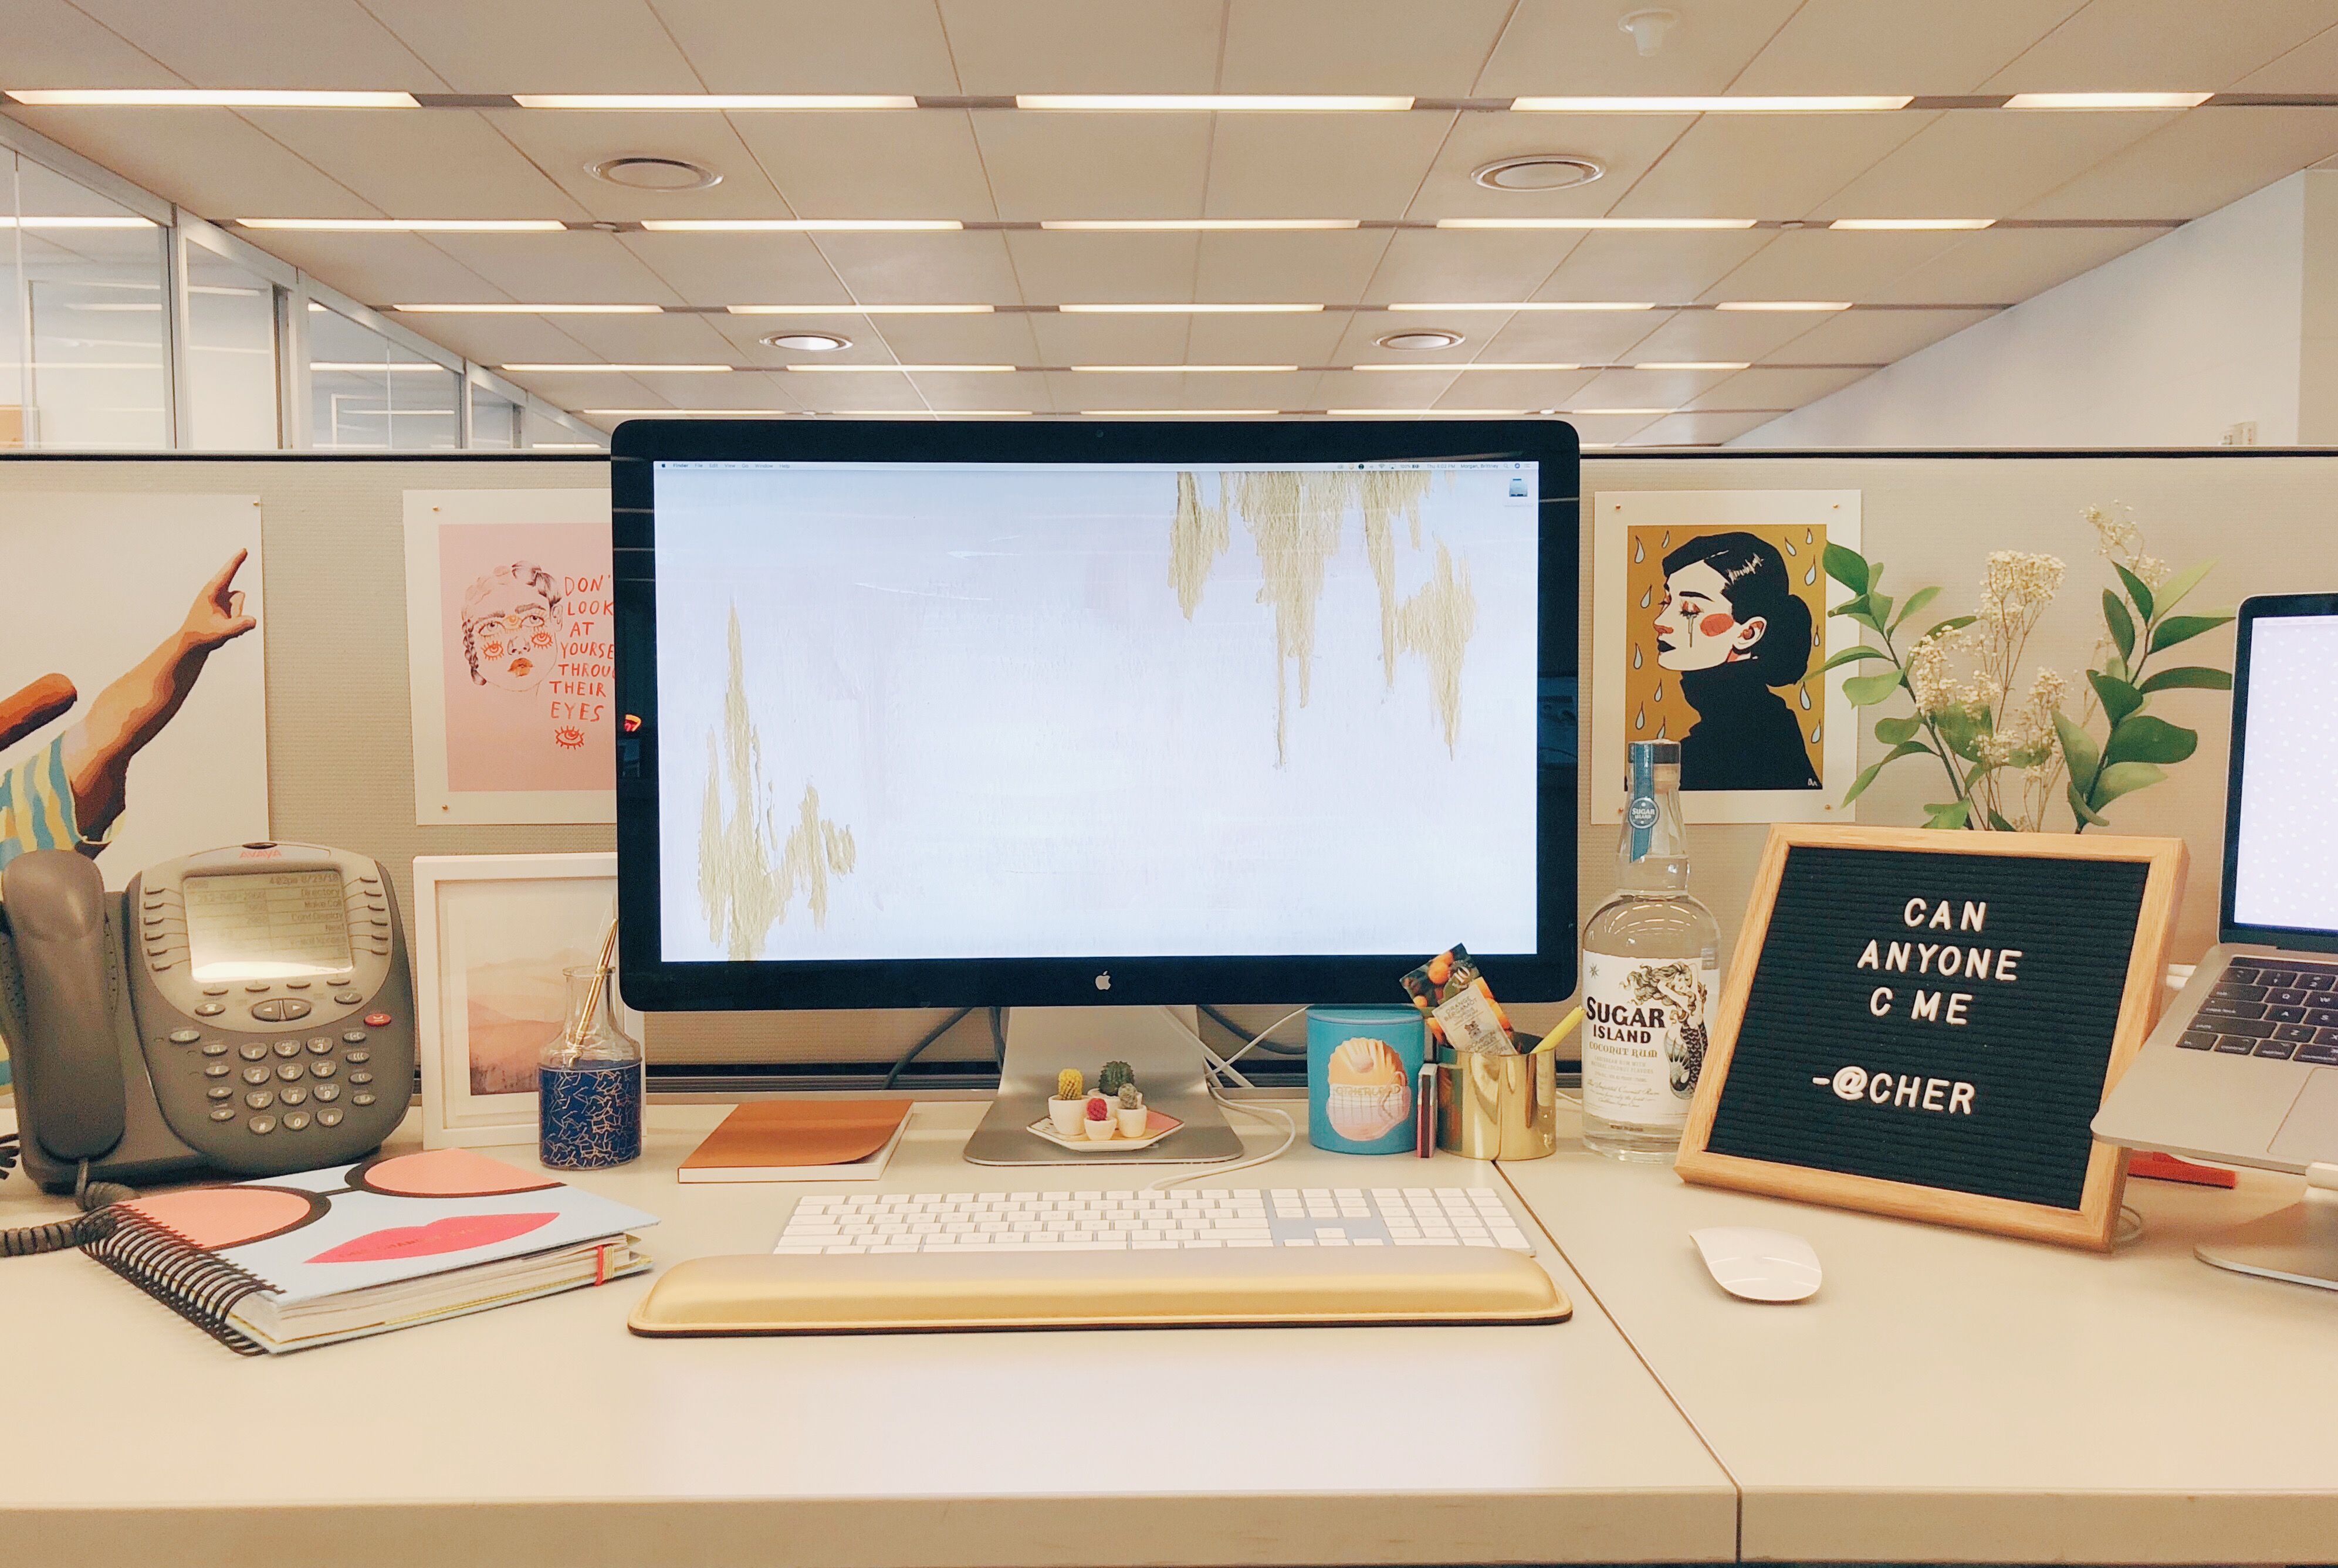 10 Best Cubicle Decor Ideas In 2018, How To Decorate A Small Desk At Work